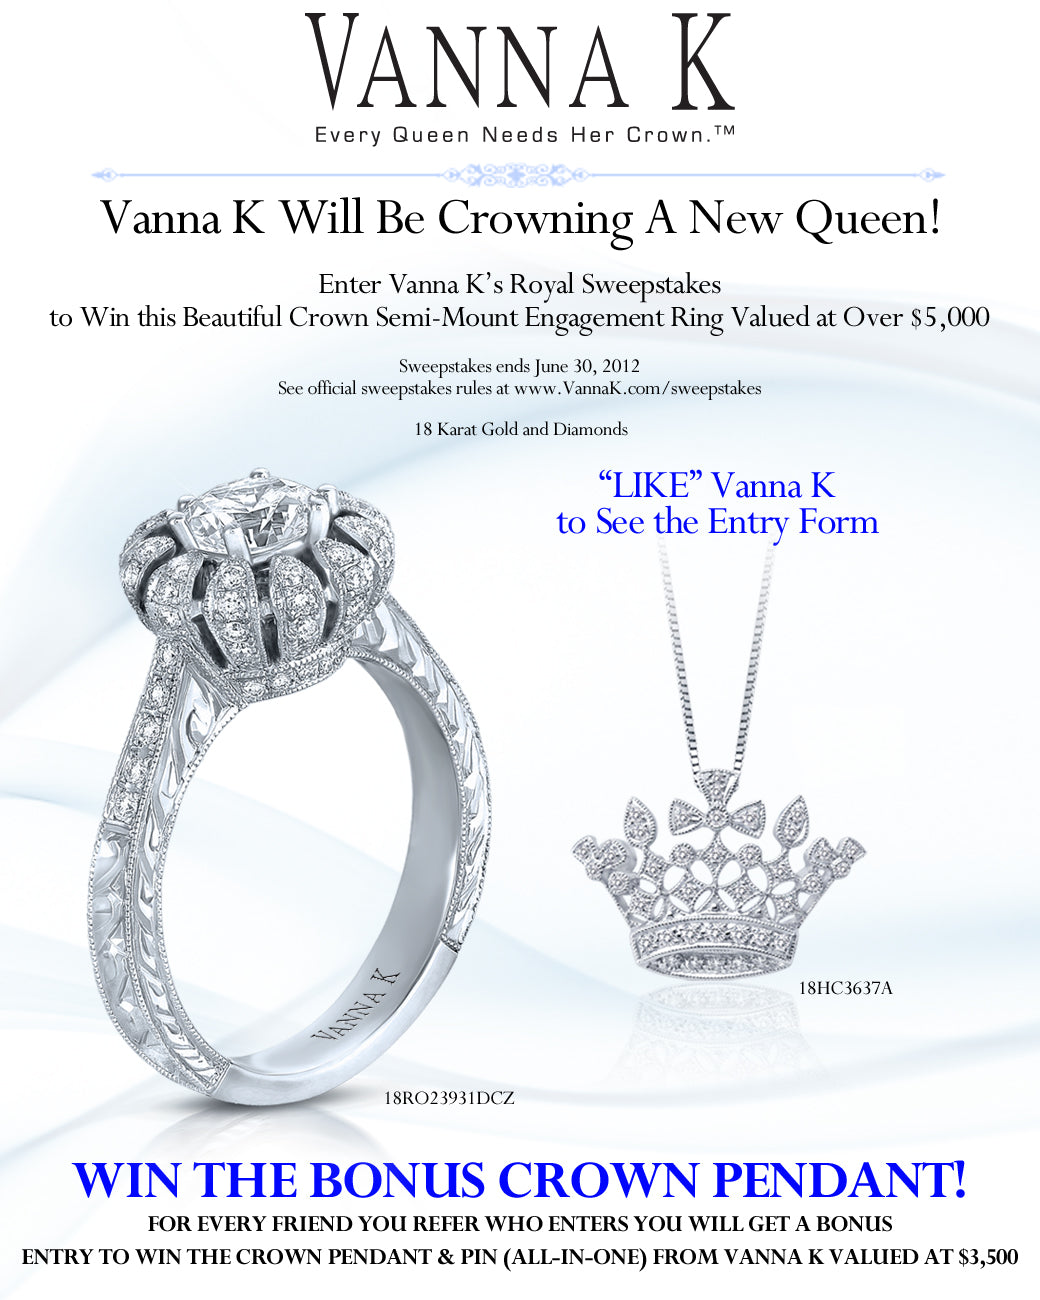 Feeling Royal? Vanna K to Launch Royal Engagement Sweepstakes!